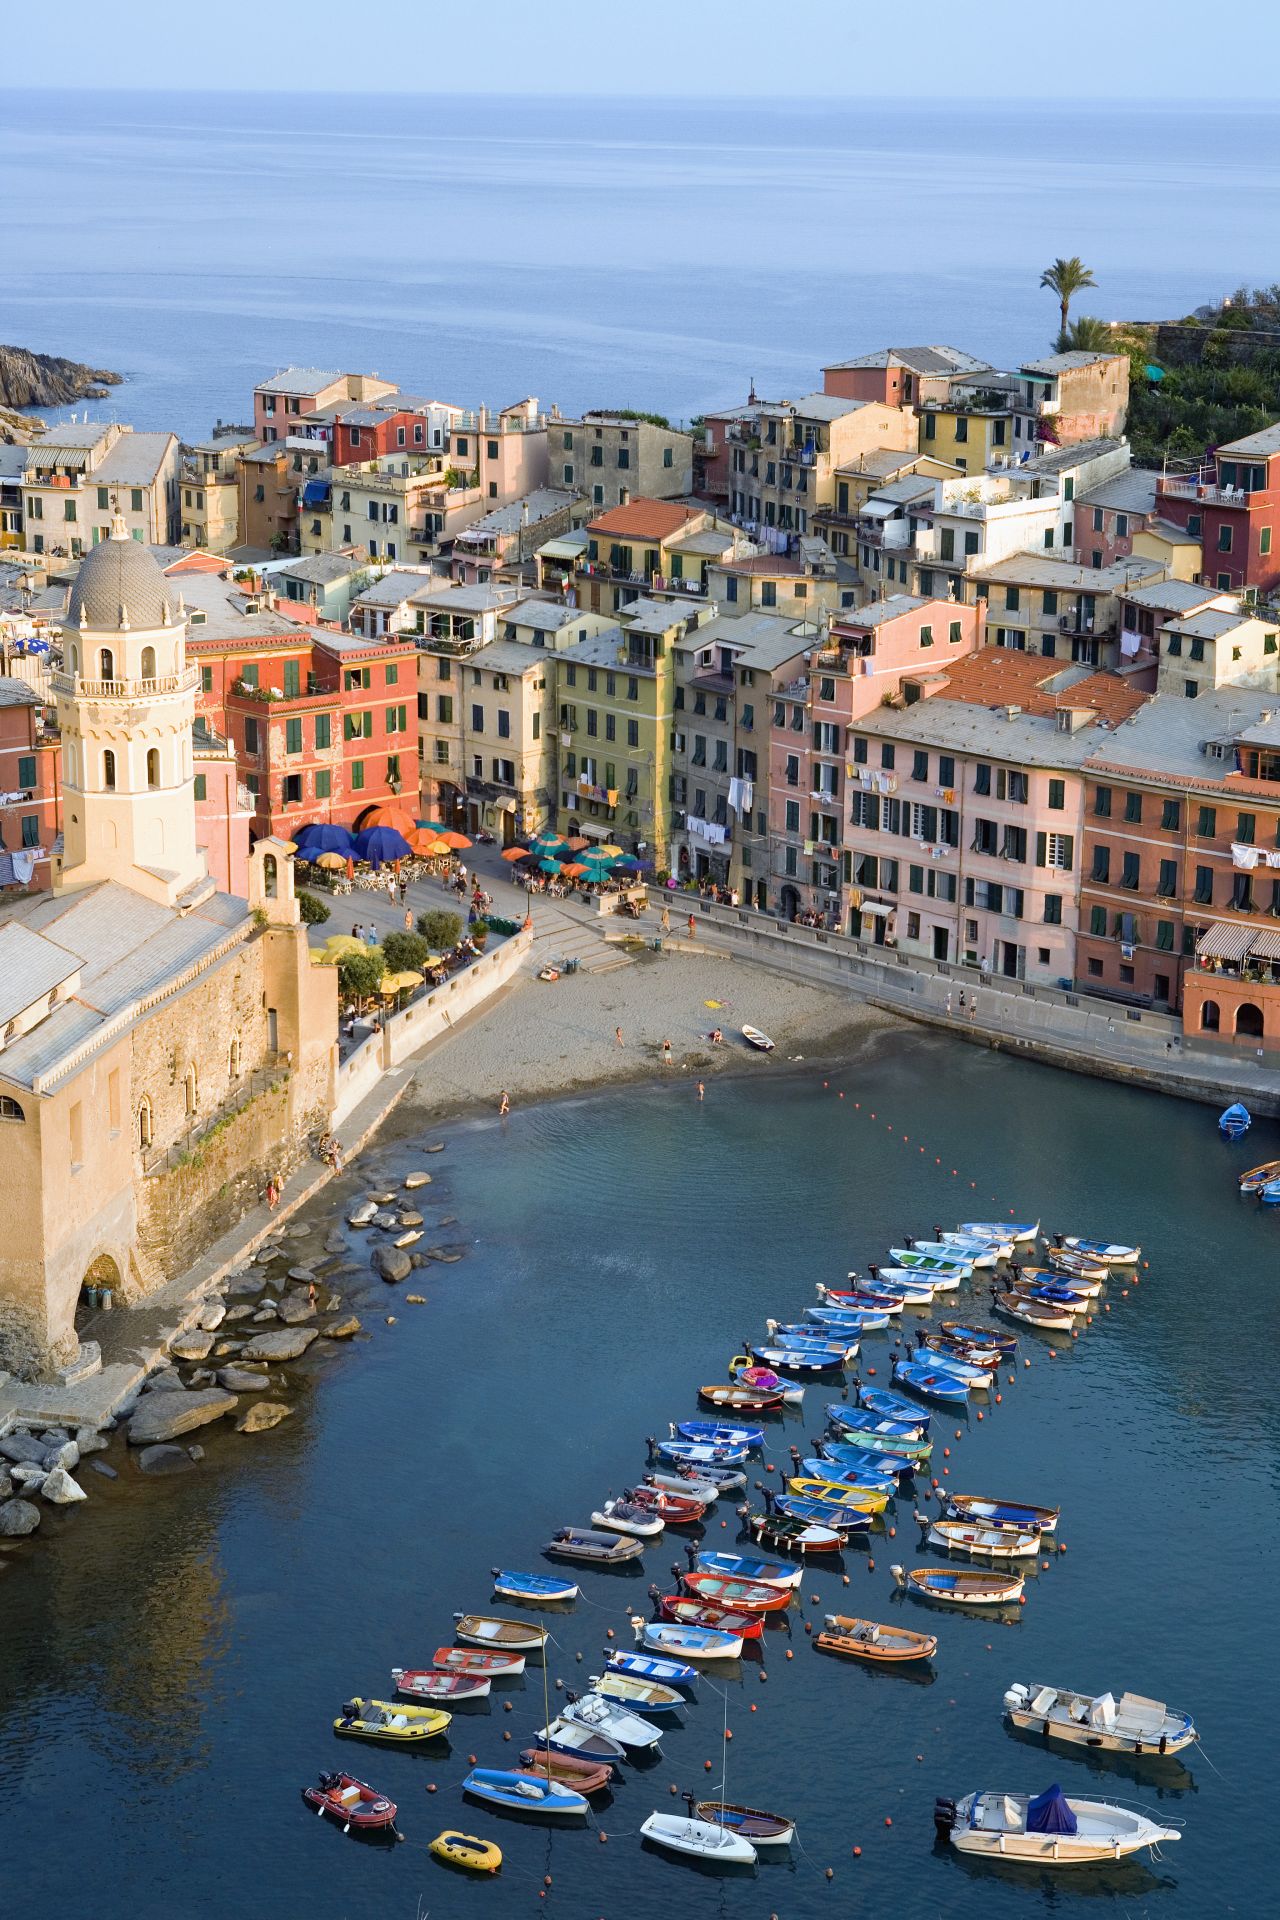 The gorgeous facades of Vernazza, Italy, were hit by devastating floods in 2011 but efforts are underway to rebuild. 